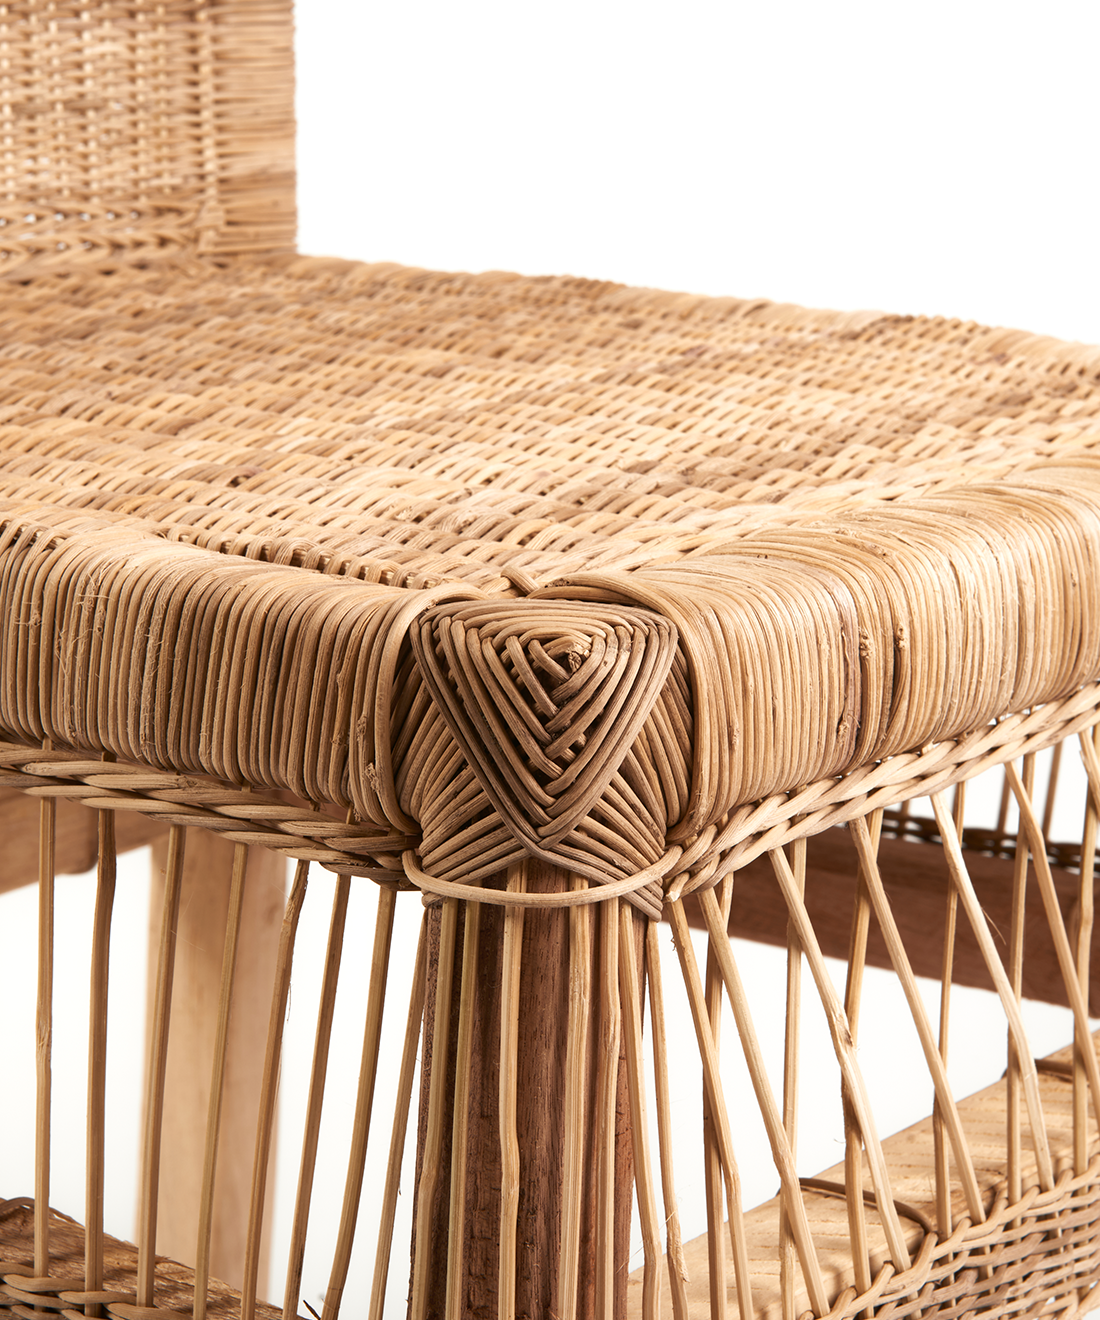 Traditional Open Weave Cane Dining Chair